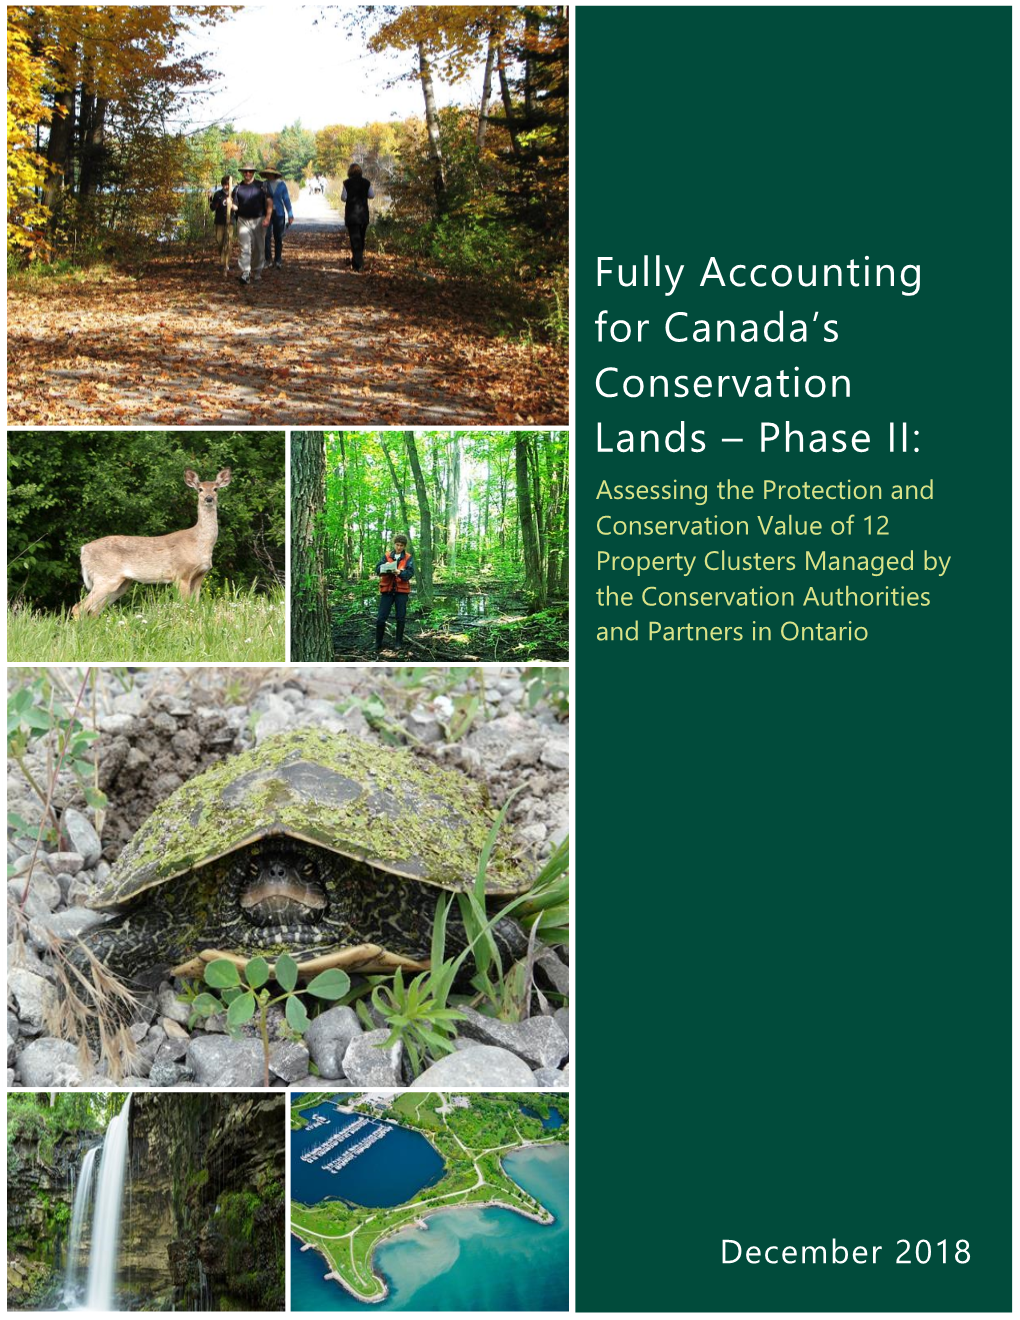 Fully Accounting for Canada's Conservation Lands